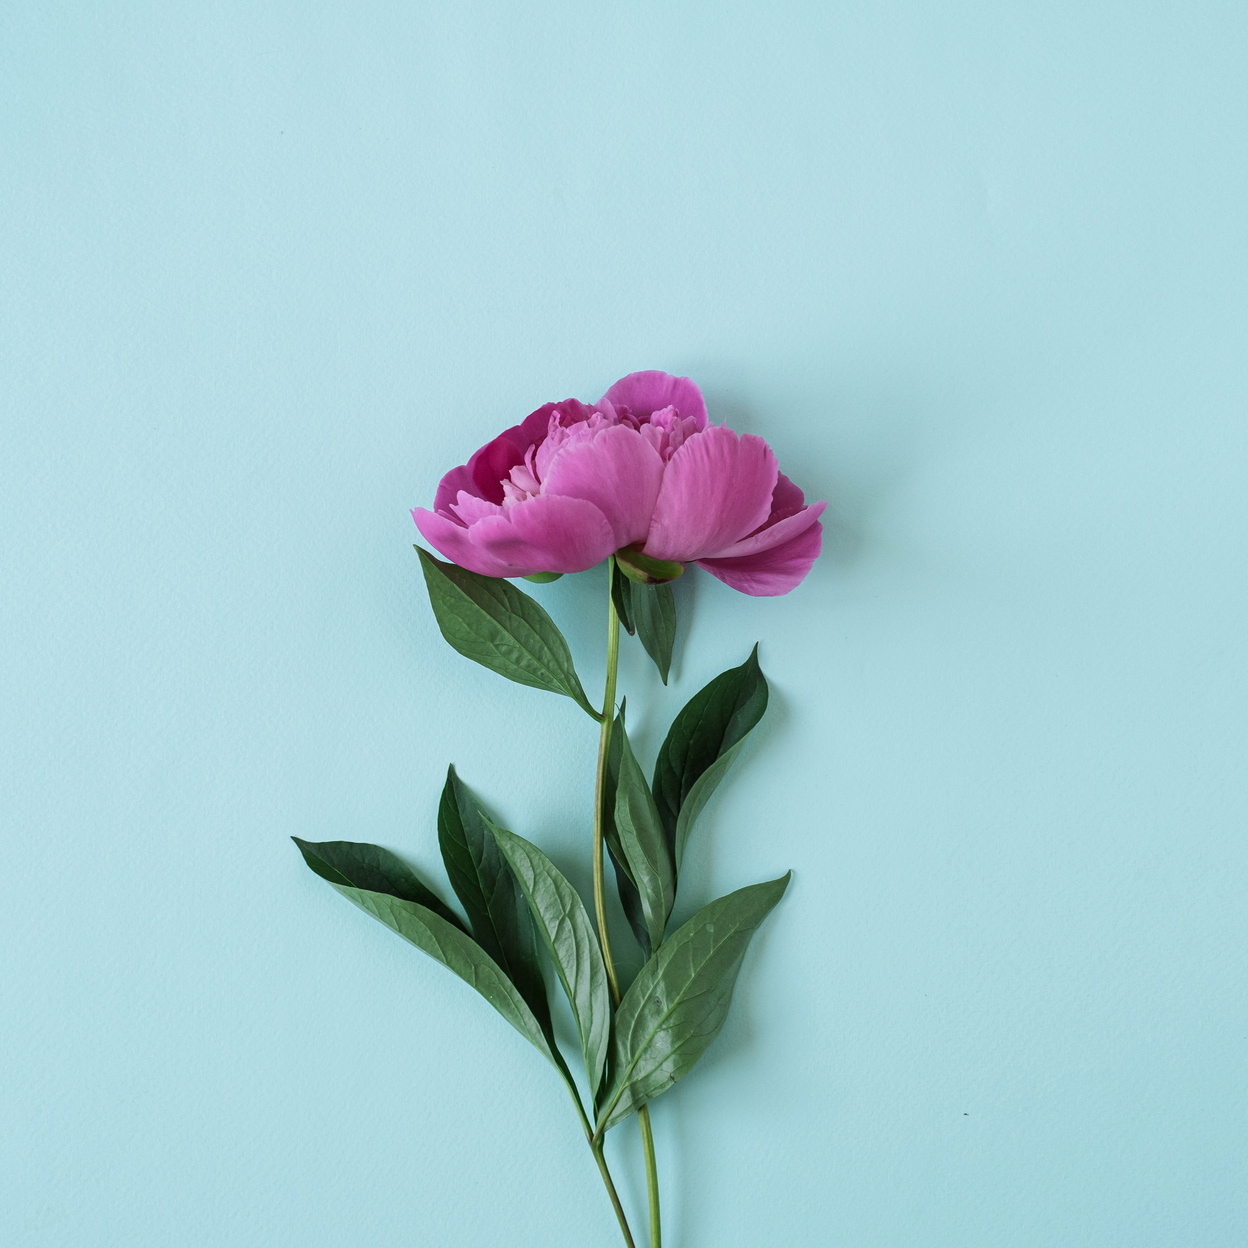 Pink Peony Flower on Blue Background 